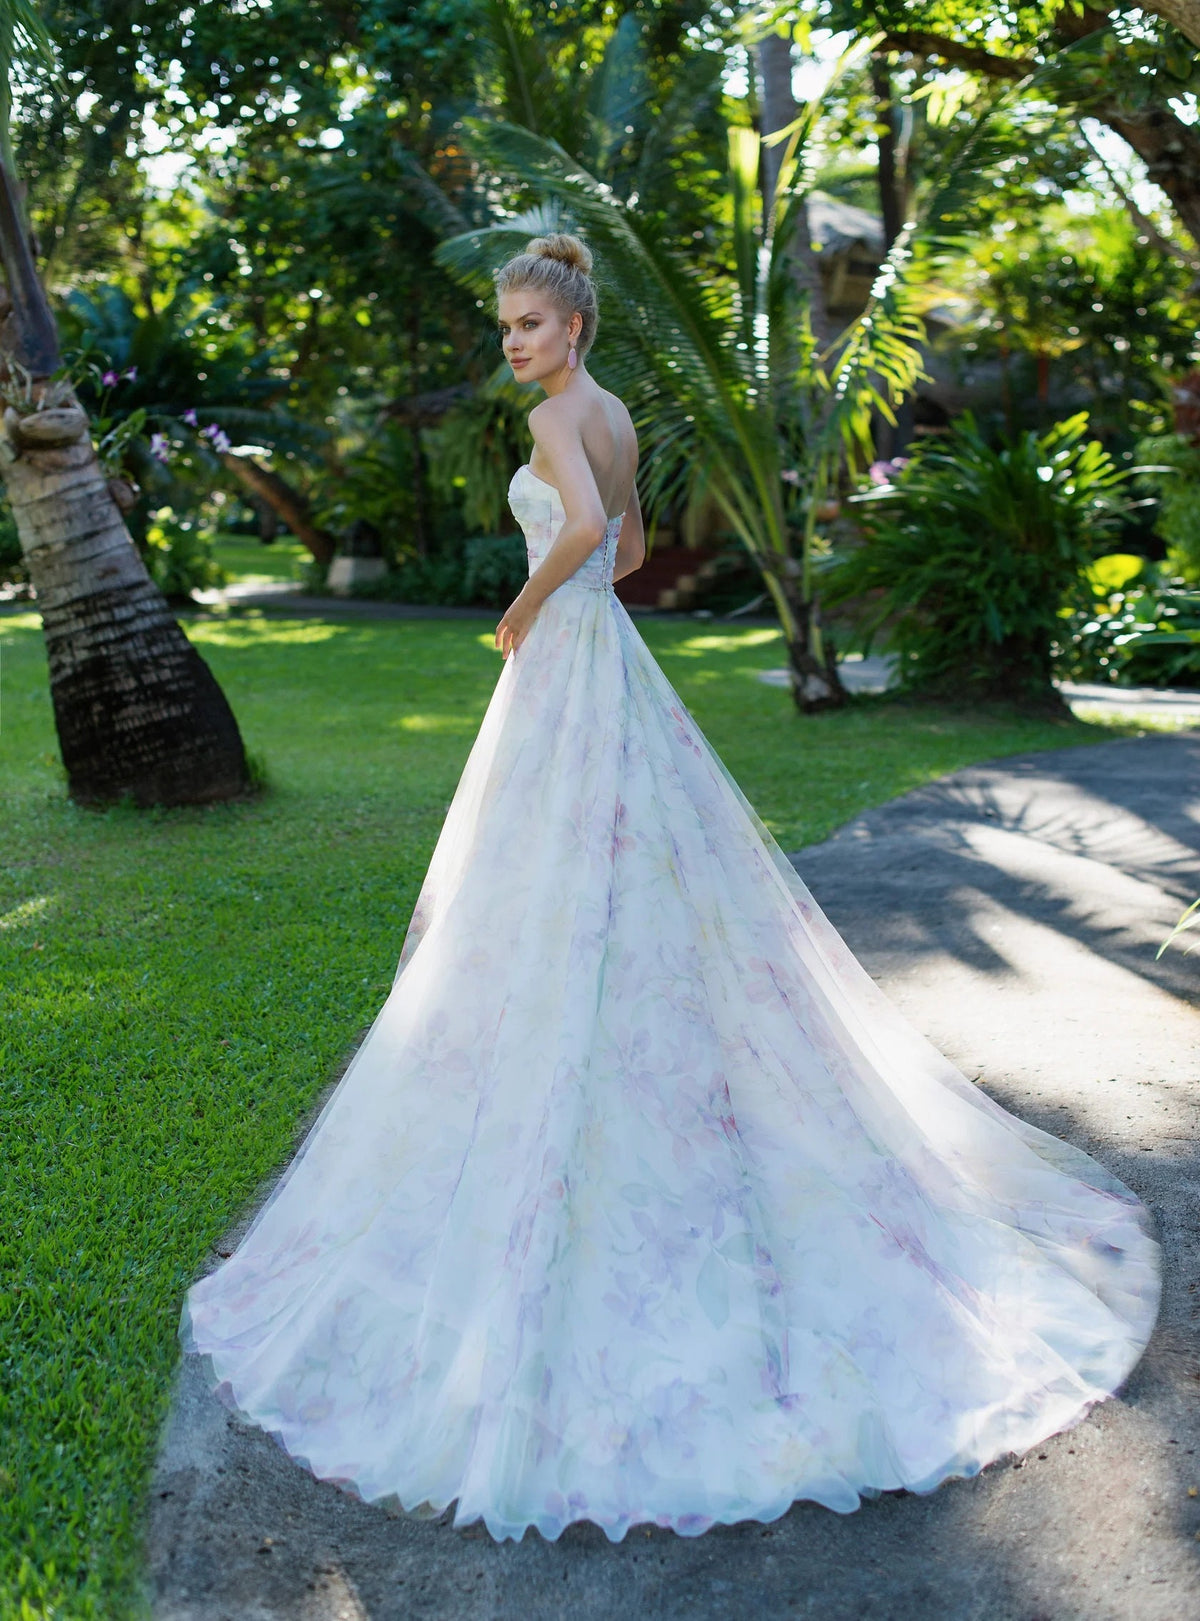 Modern Aline Sleeveless Strapless Floral Print Wedding Dress Bridal Gown with Train Corset Back Floral Details Unique Design Straight Neck